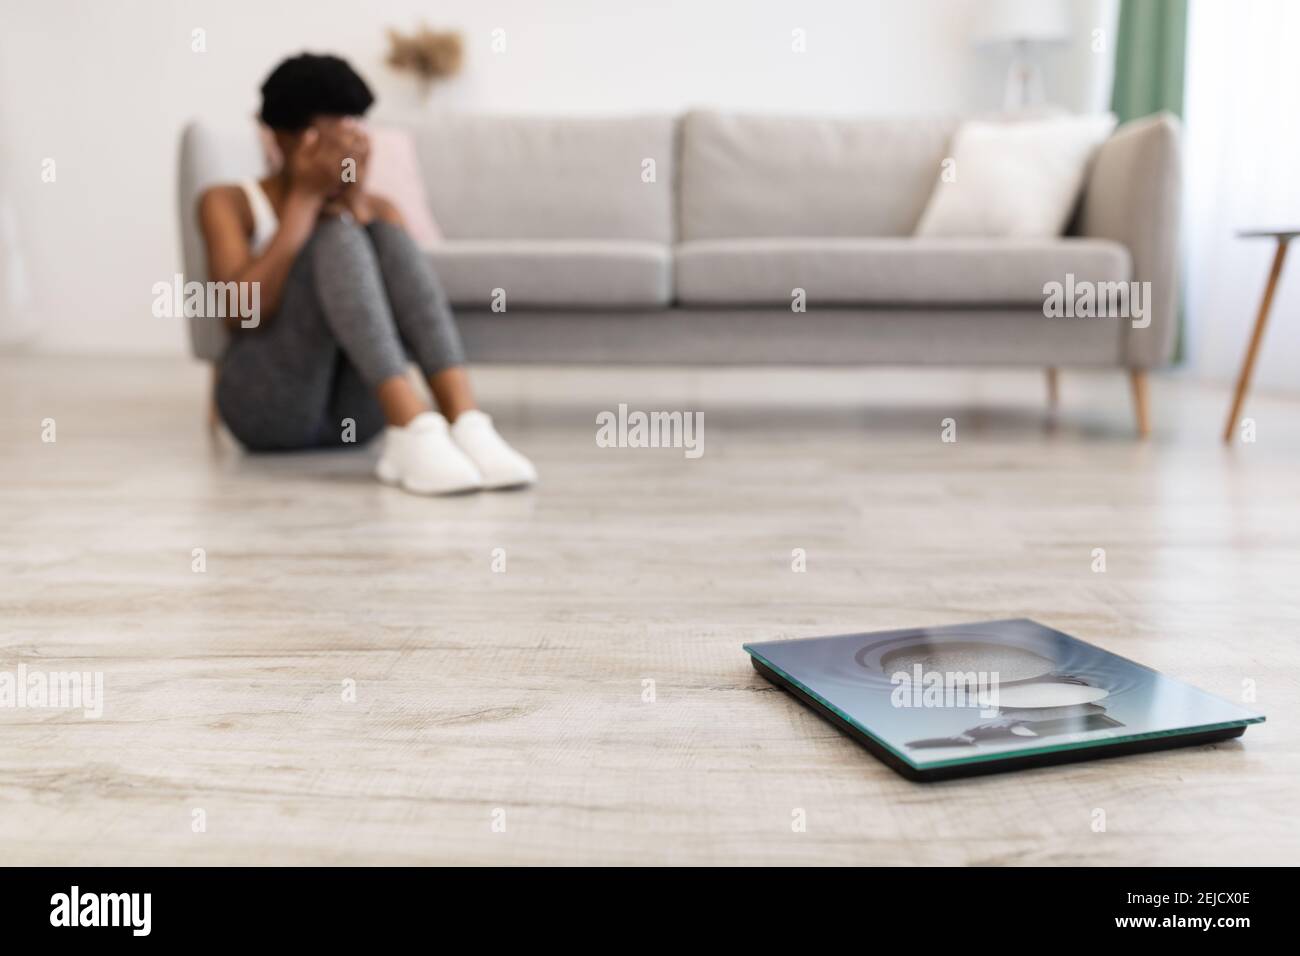 Woman Crying Sitting Near Scales After Slimming Failure At Home Stock Photo